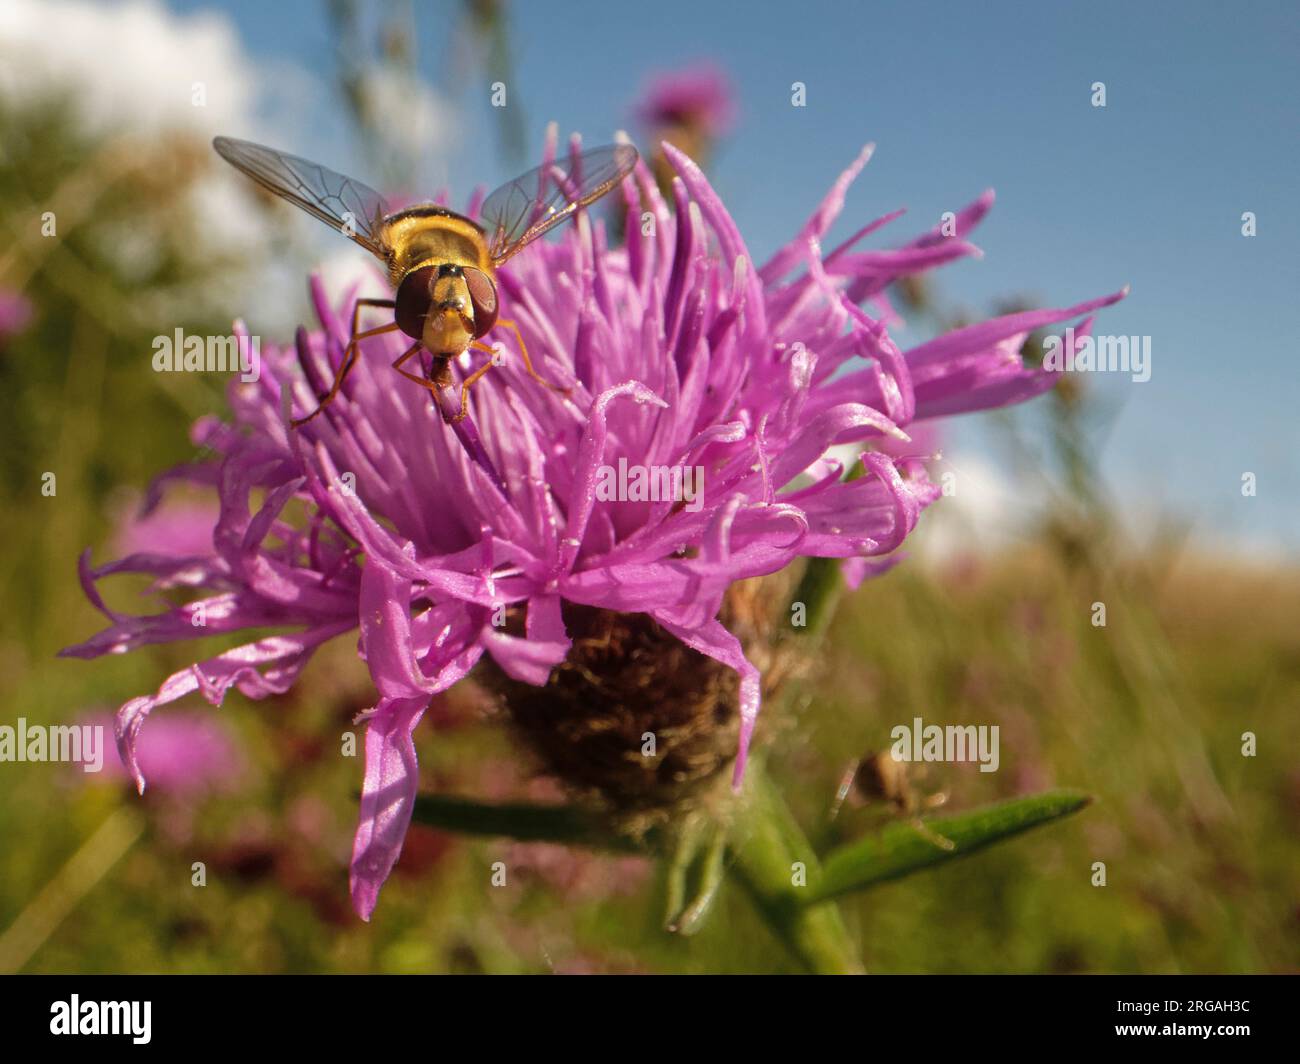 Lesser banded or Glass-winged hoverfly (Syrphus vitripennis) nectaring on Greater knapweed (Centaurea scabiosa), chalk grassland meadow, Wiltshire, UK. Stock Photo